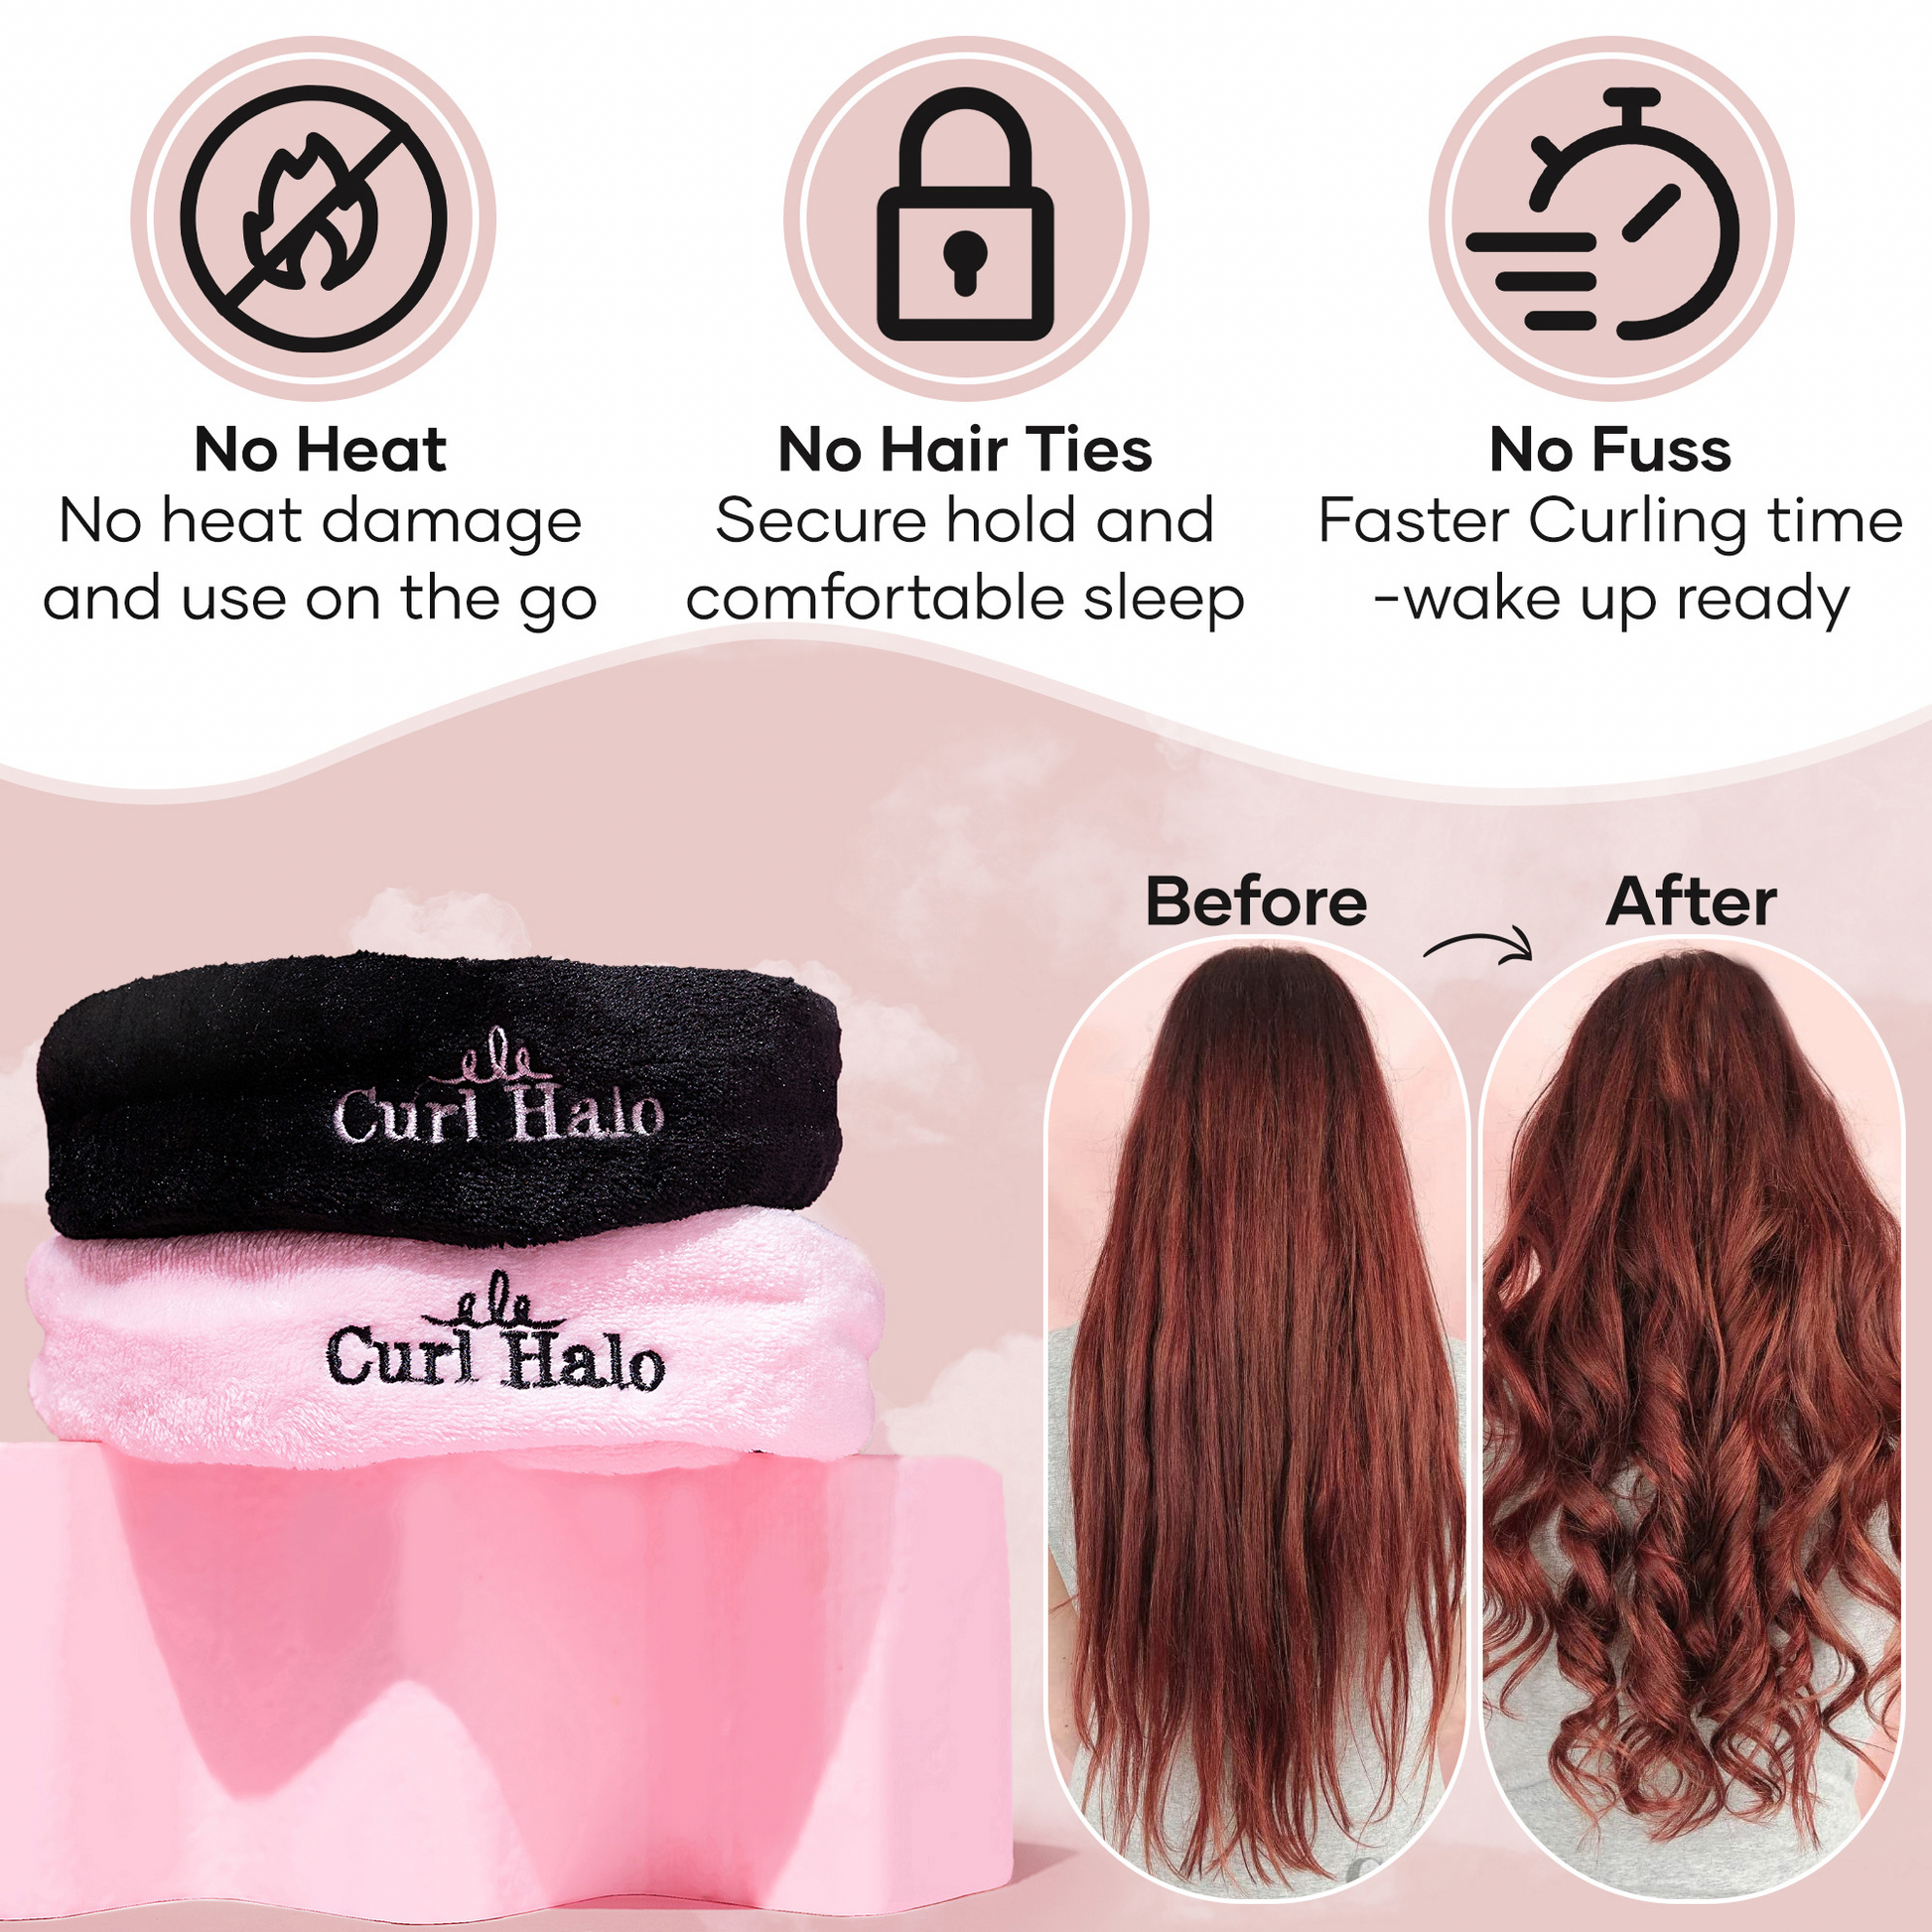 Heatless Curler Products for Easy, Damage-Free Waves While You Sleep